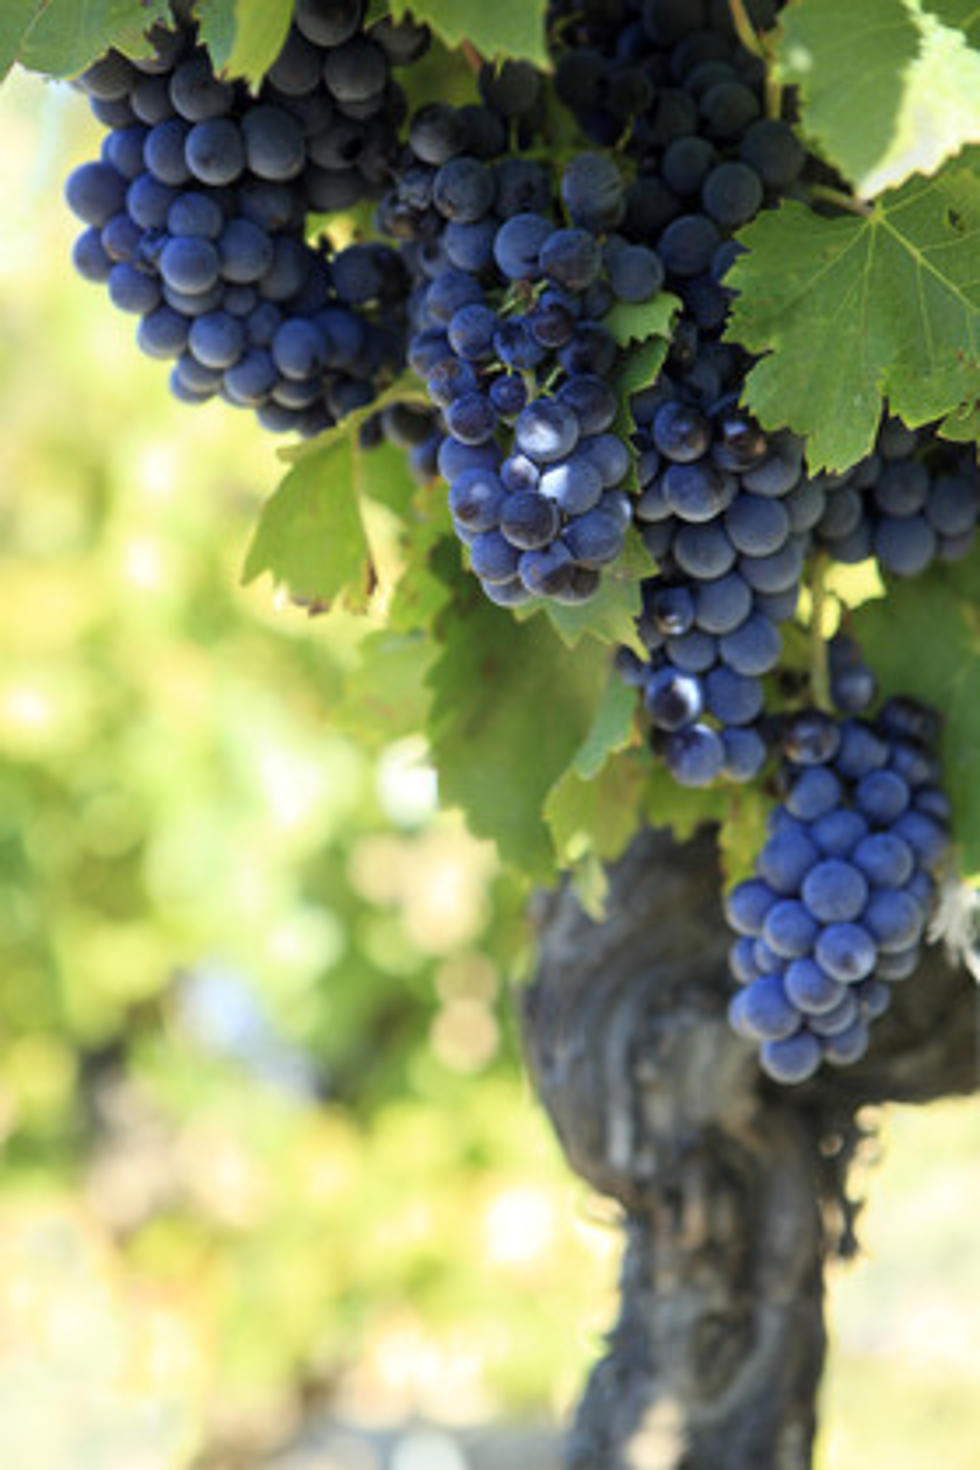 Want to Make Some Quick Cash Picking Grapes?